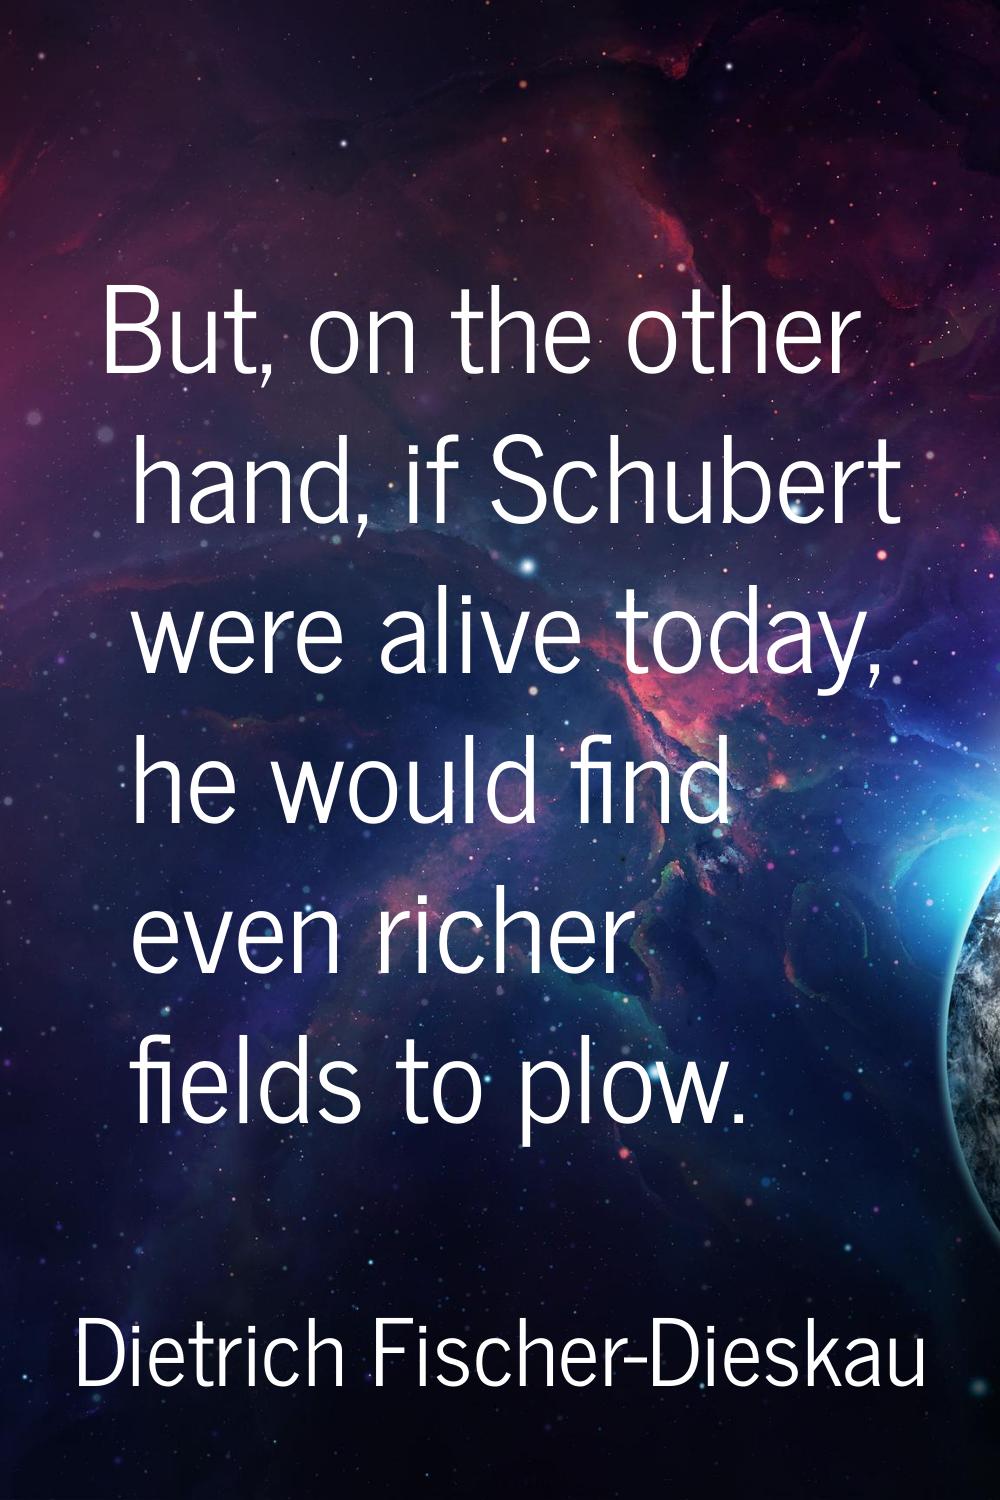 But, on the other hand, if Schubert were alive today, he would find even richer fields to plow.